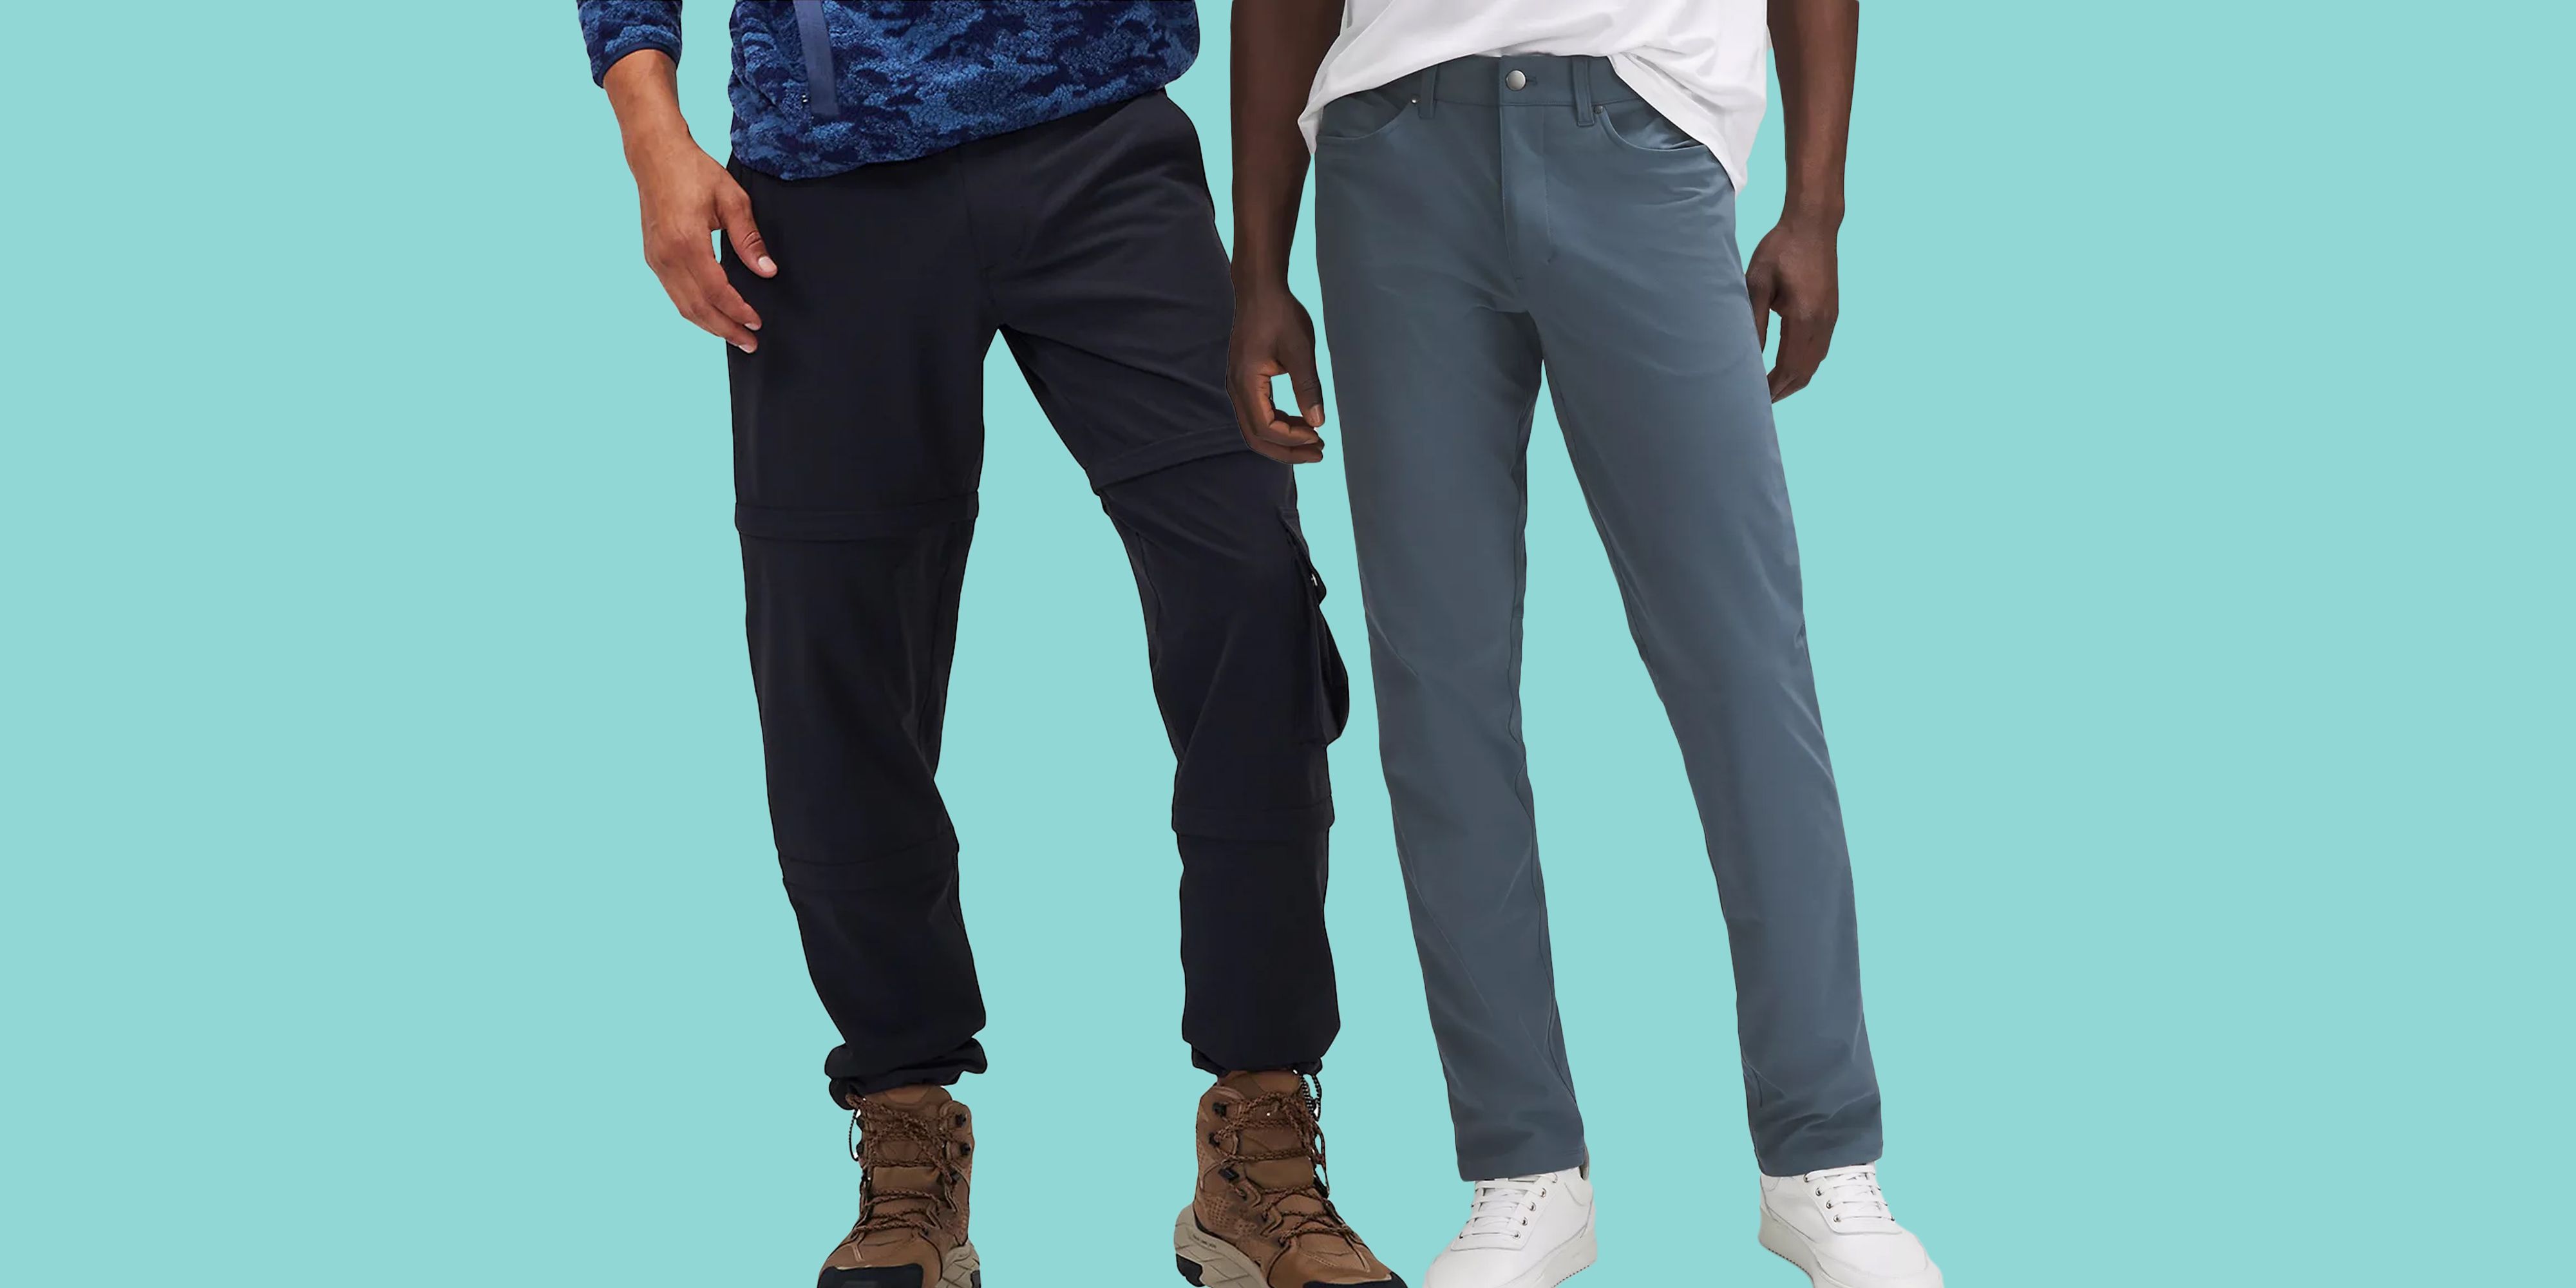 7 Best Travel Pants for Men Review (Updated)